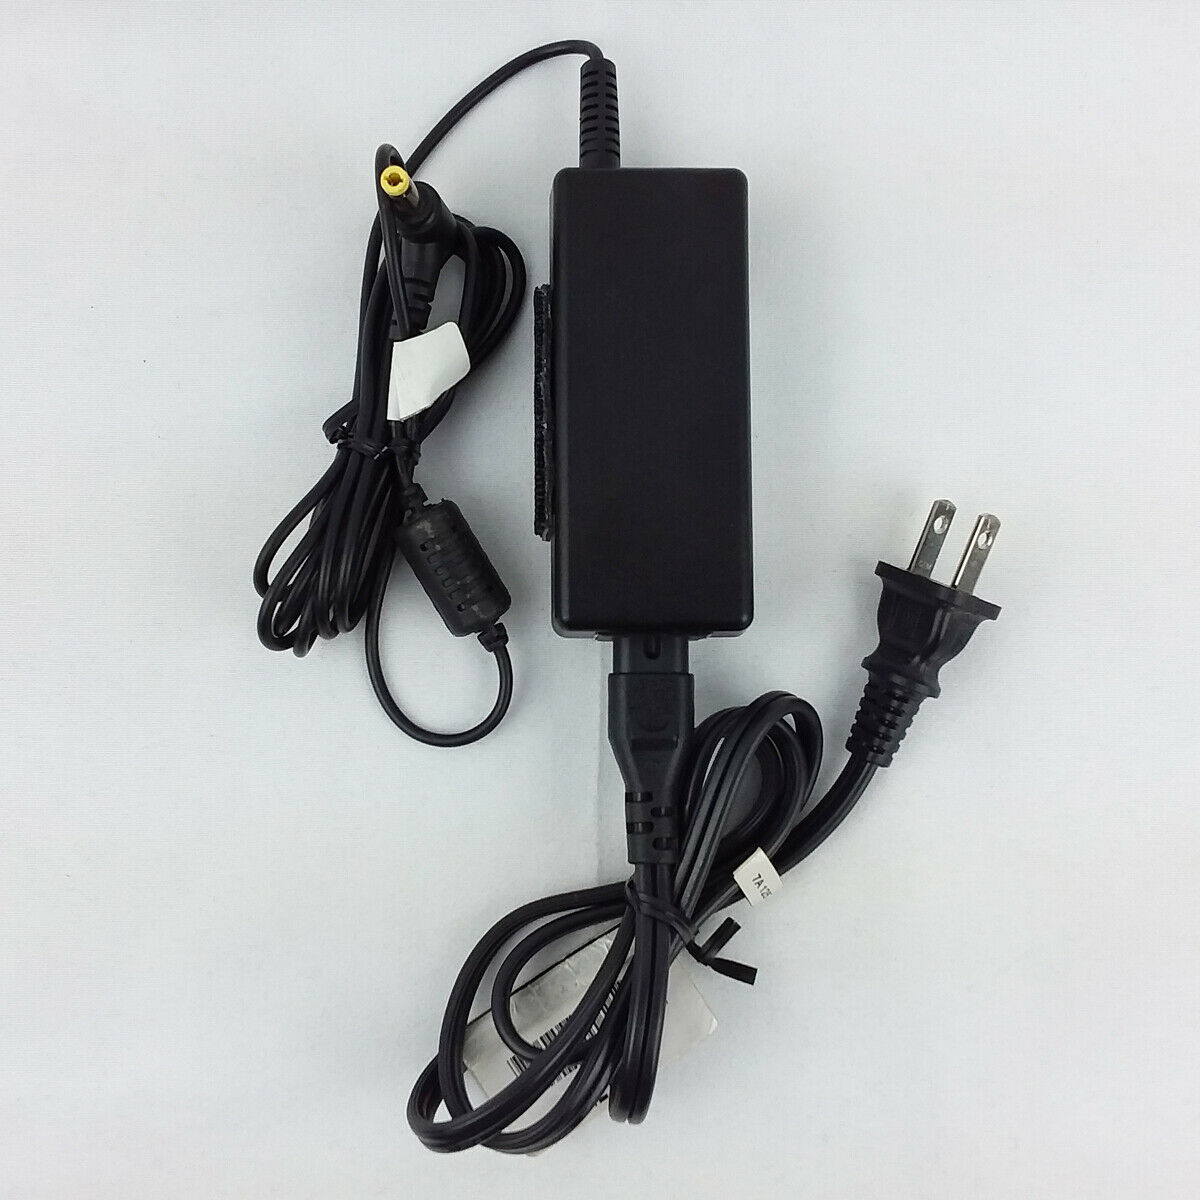 Original Safety LN-A0403A3C Power Adapter Cable Cord Box Adaptor Brand: Safety